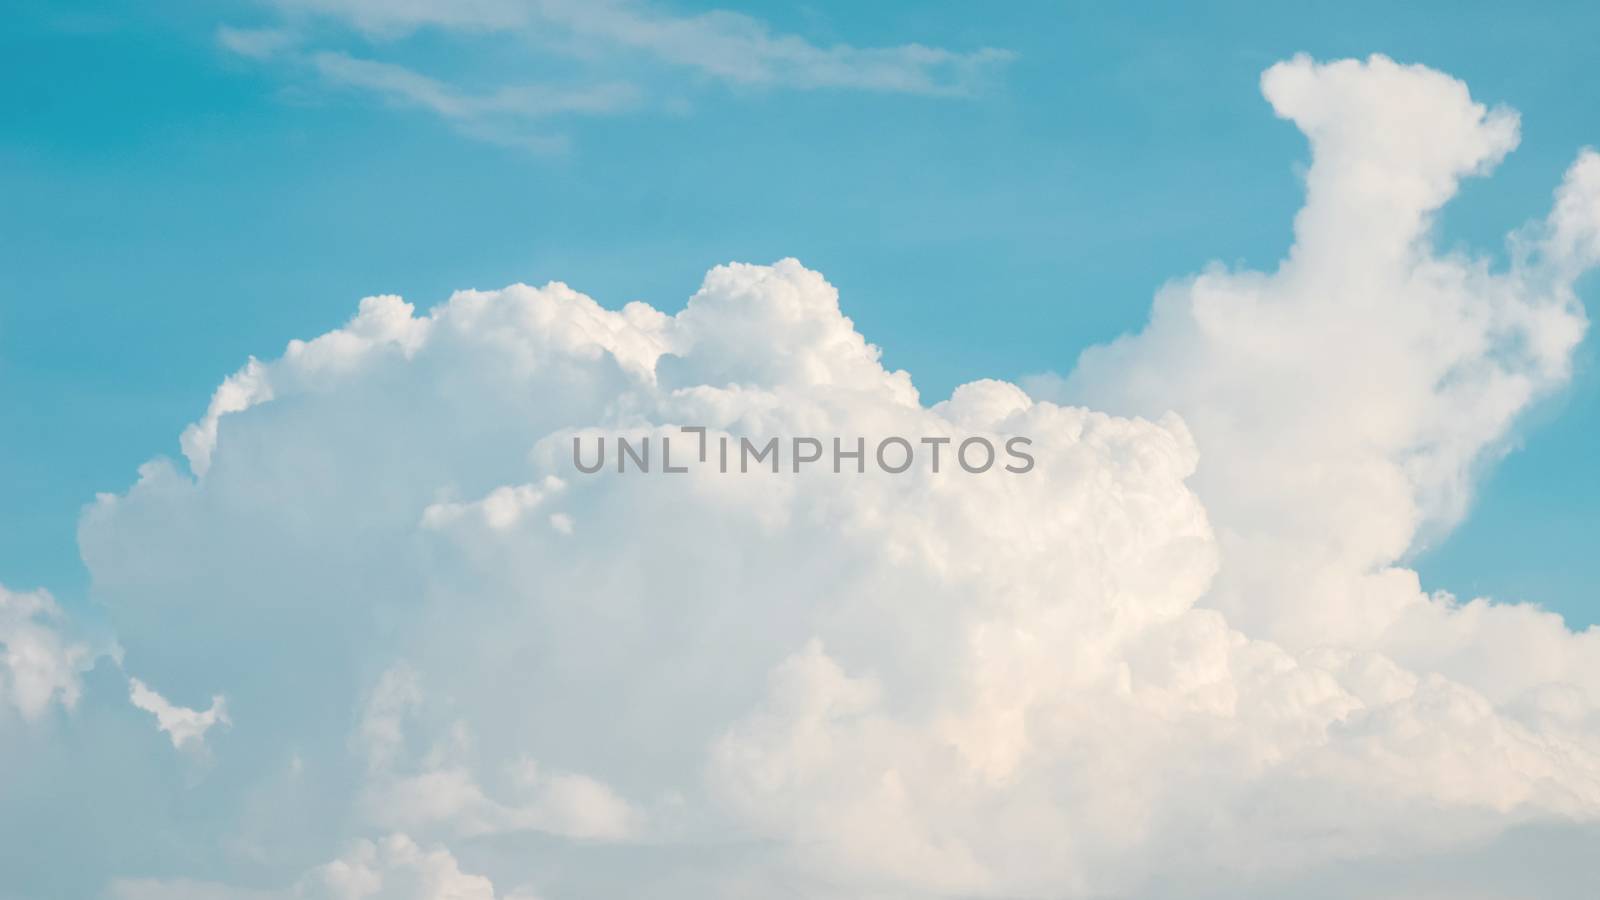 Nice clouds in blue sky background by pixbox77